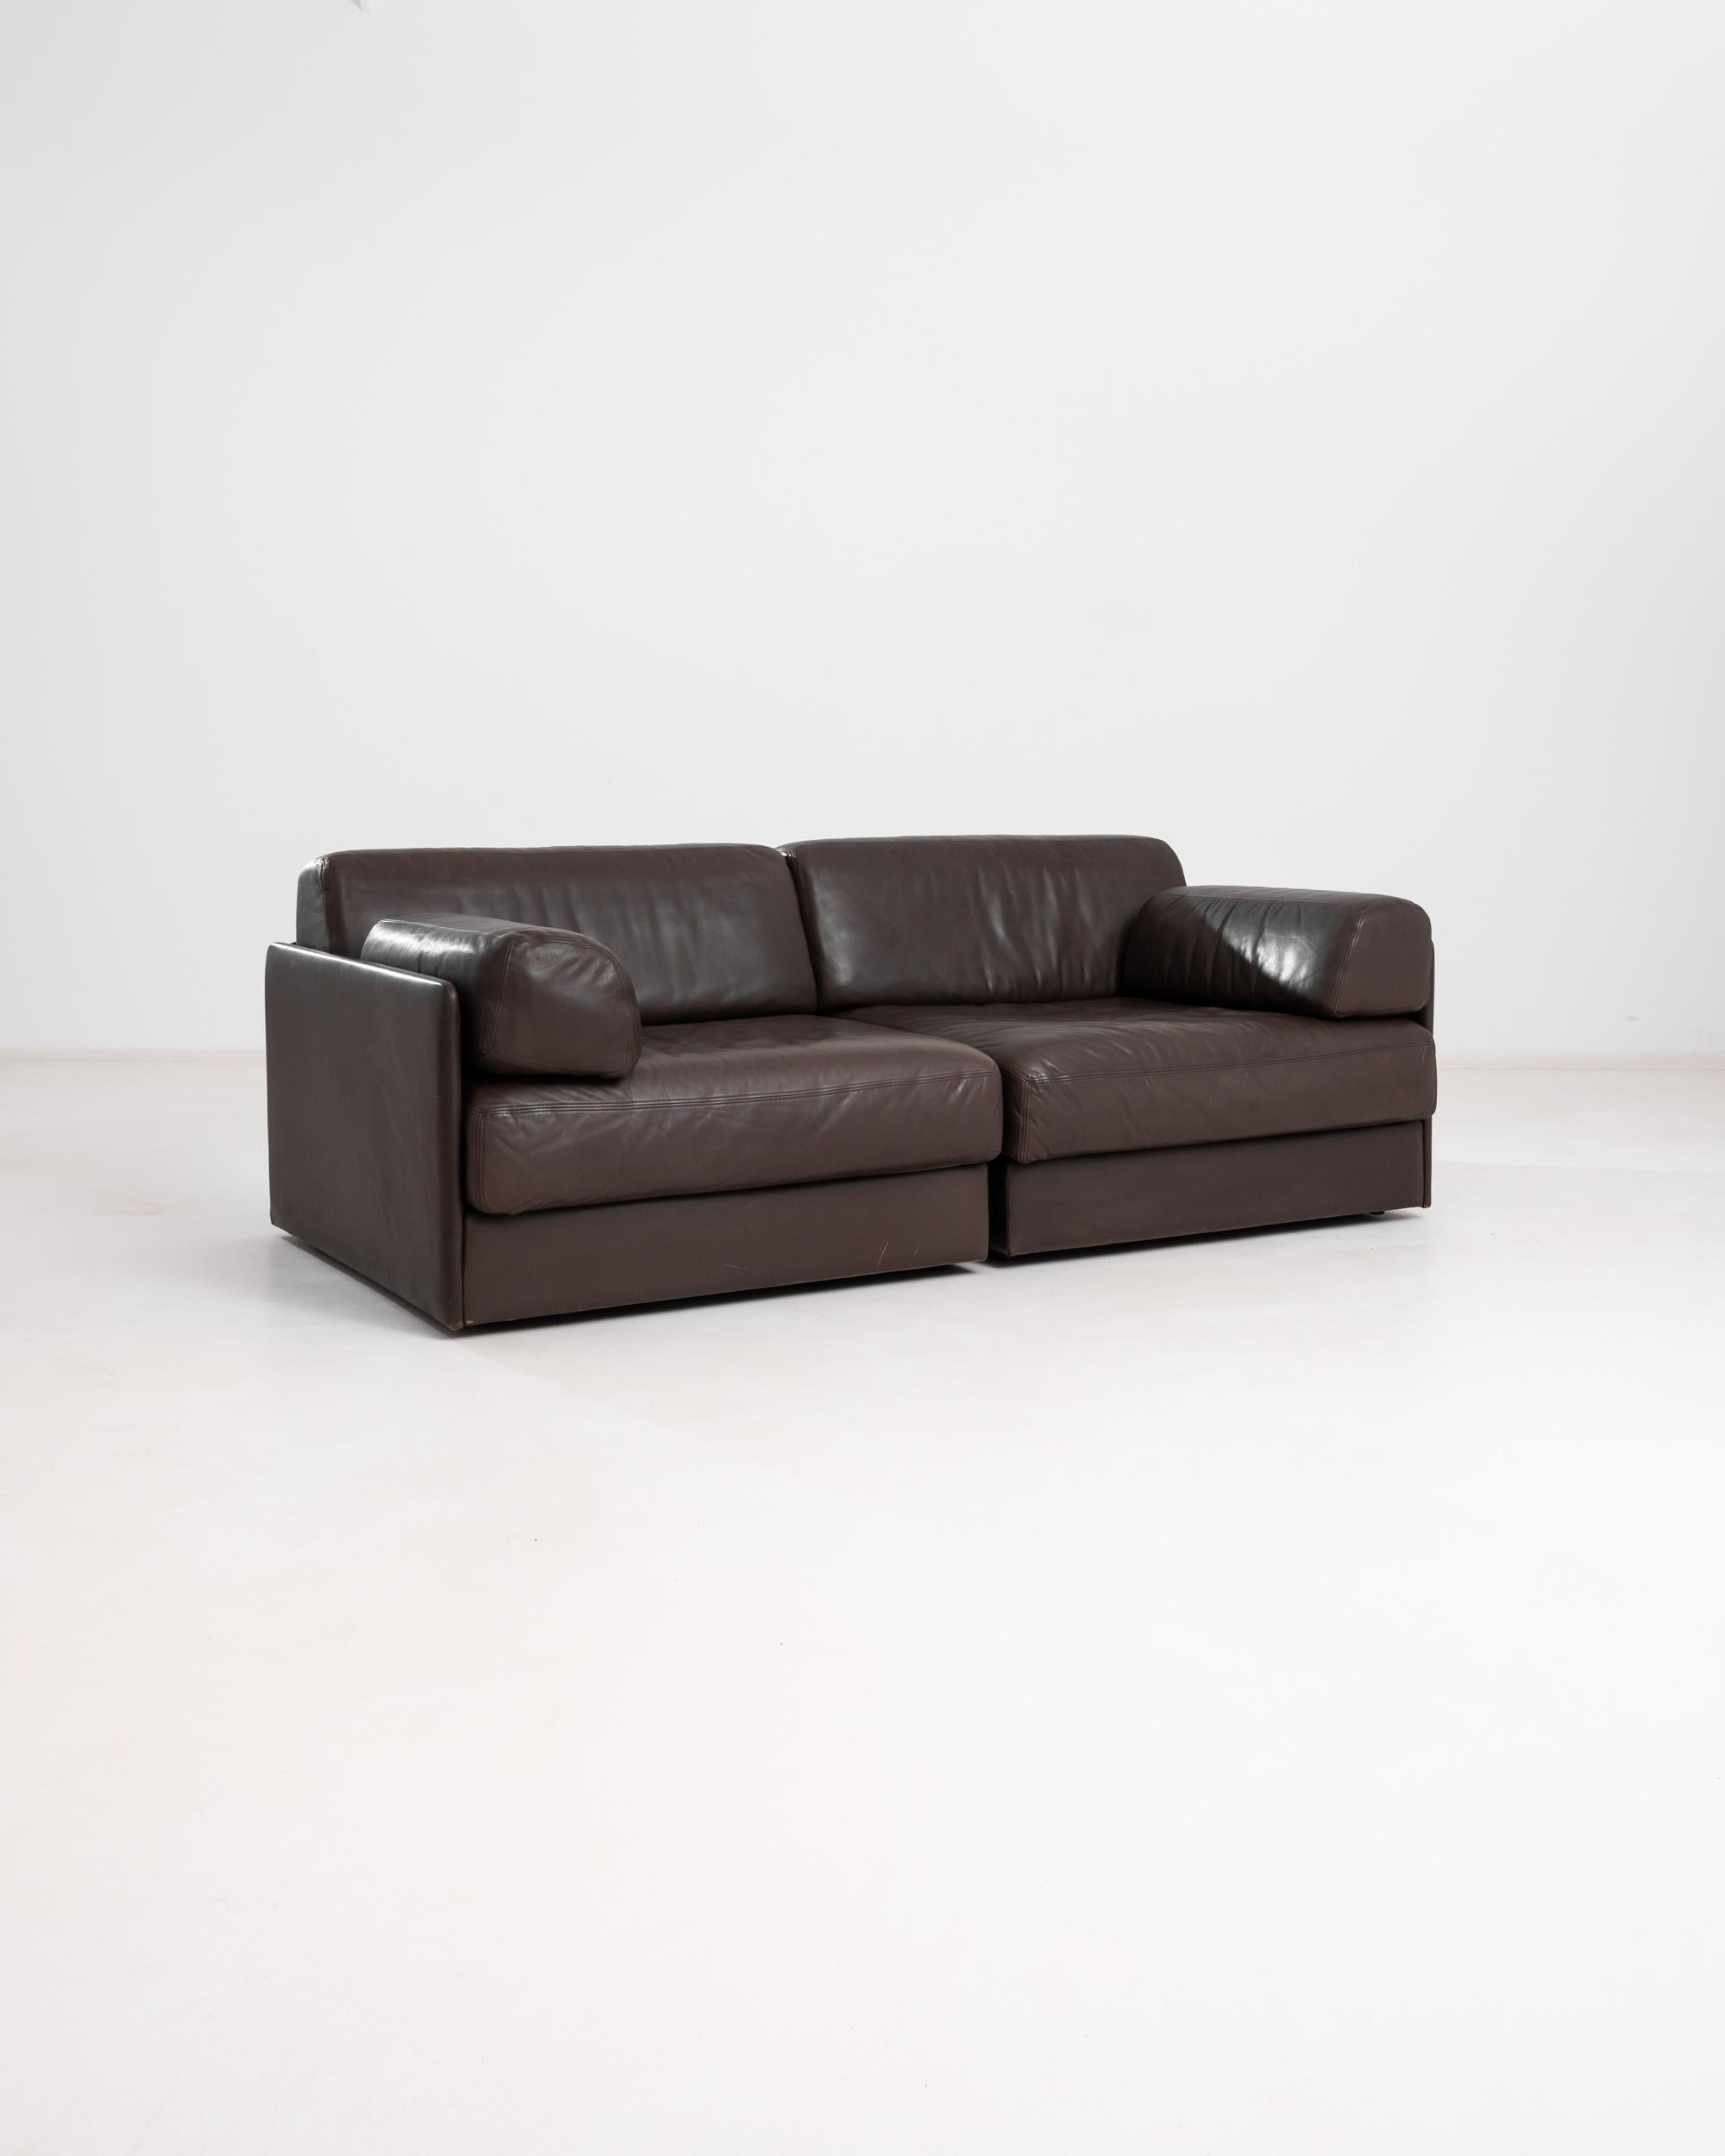 1970s Swiss Modular Leather Sofa DS76 by De Sede For Sale 3